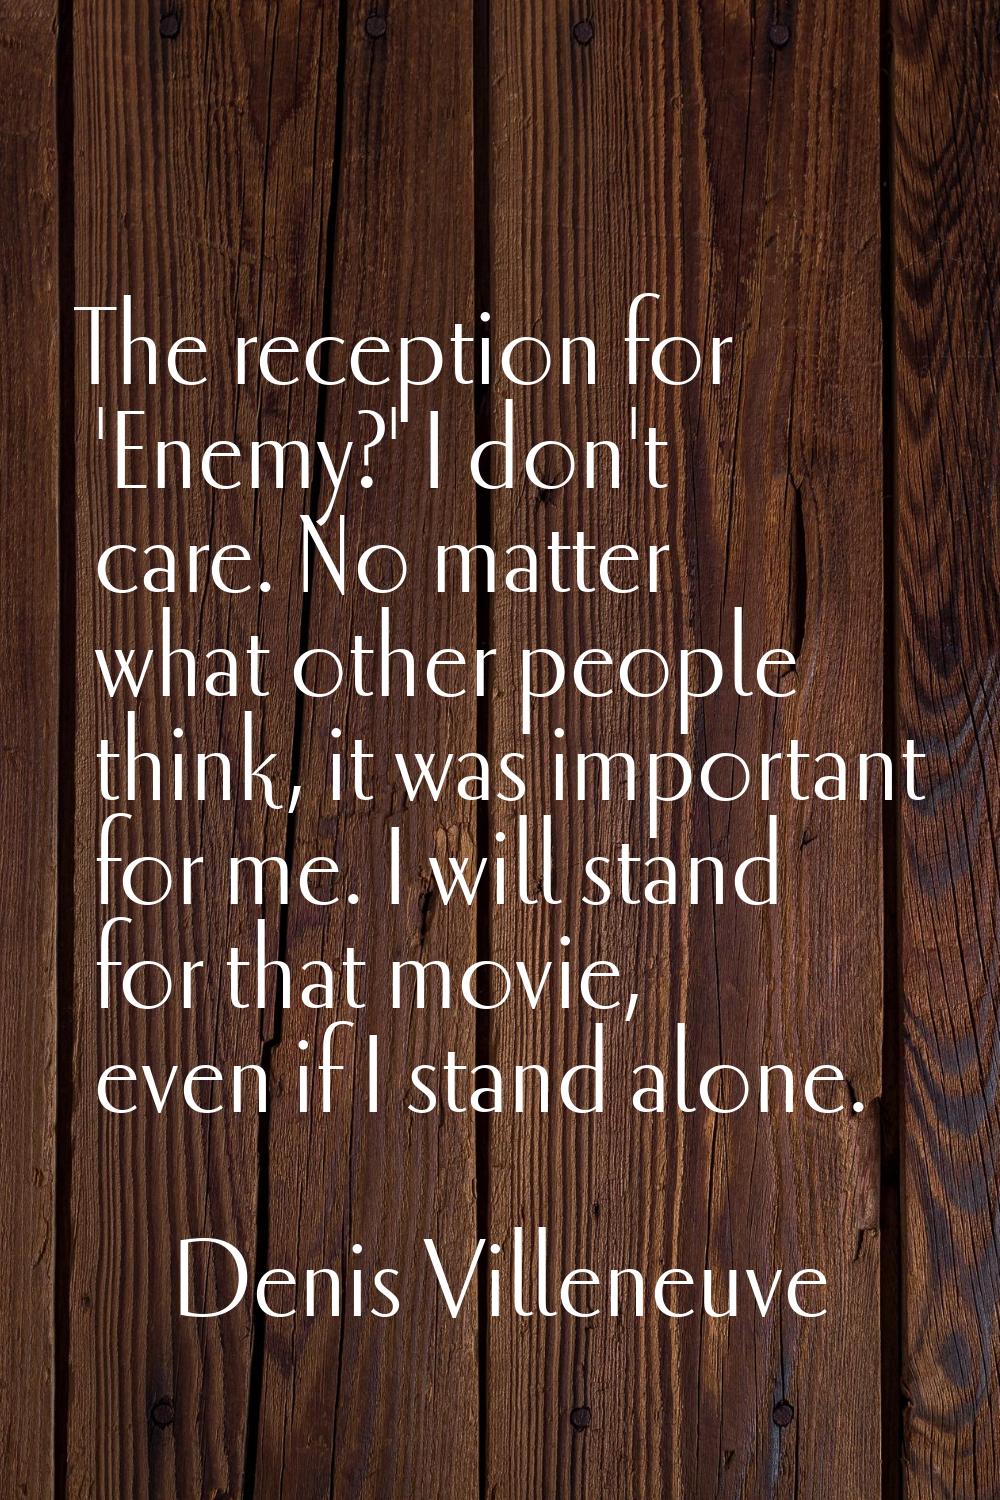 The reception for 'Enemy?' I don't care. No matter what other people think, it was important for me